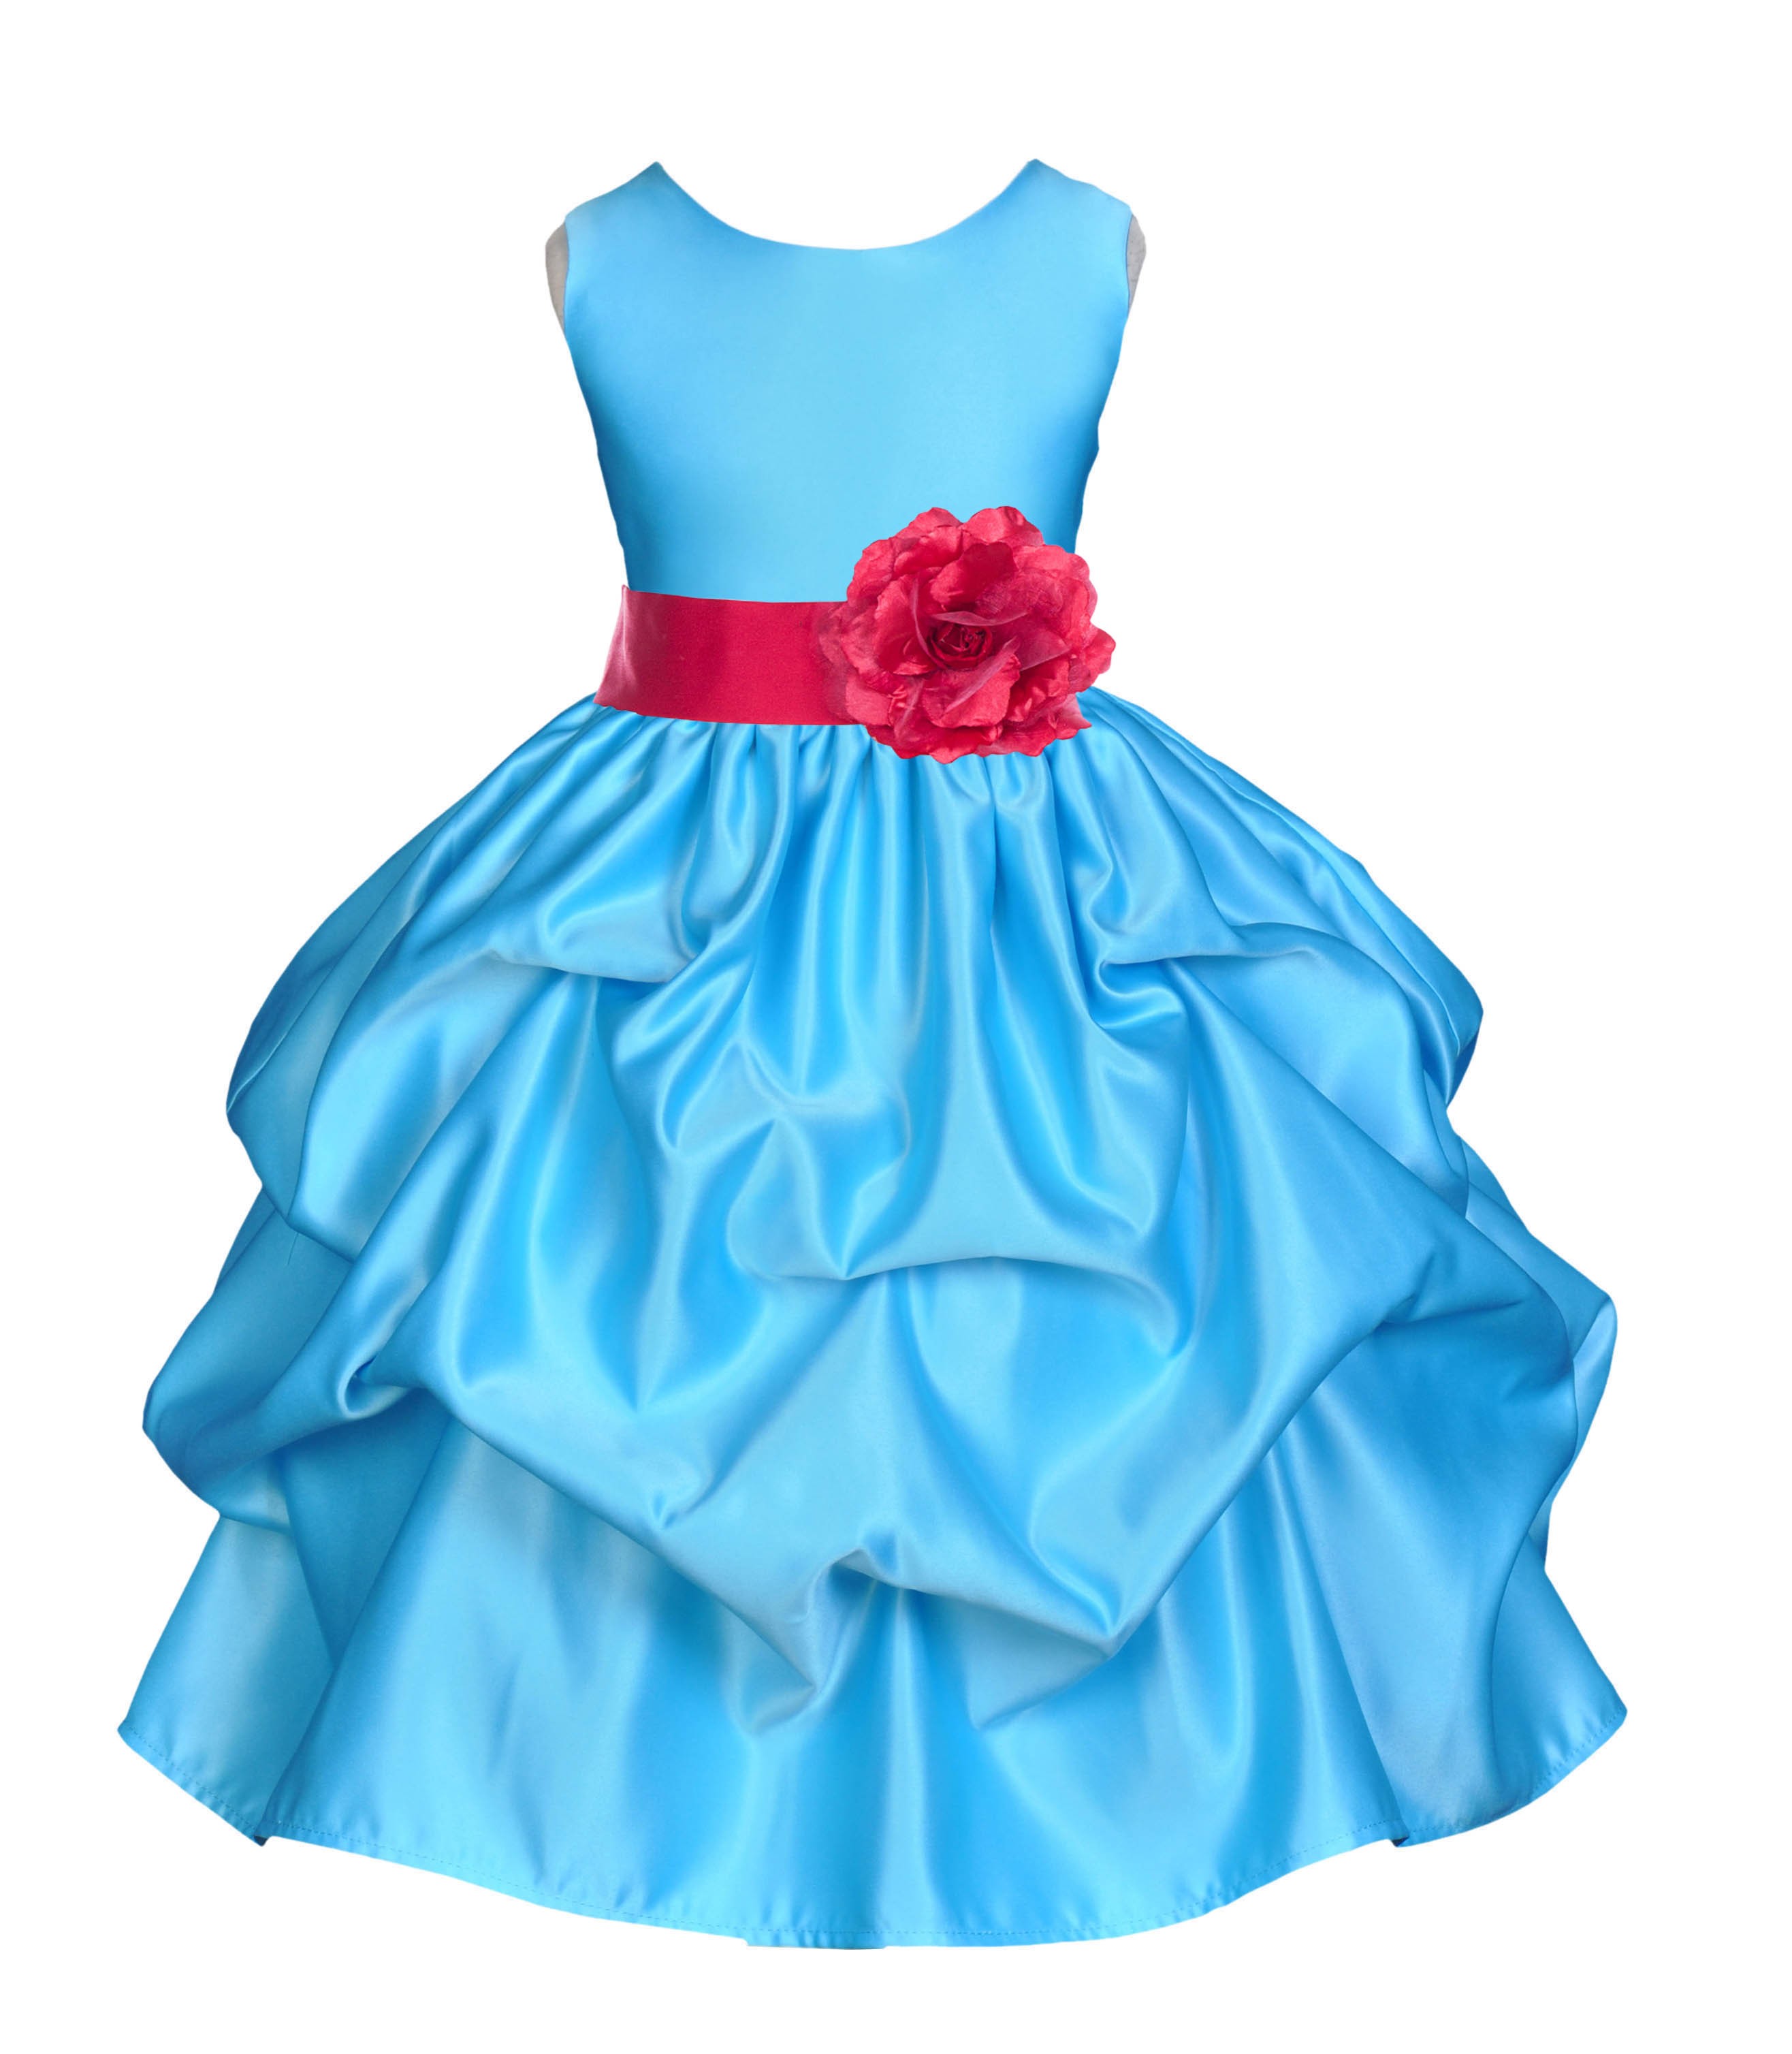 Turquoise/Cherry Satin Pick-Up Flower Girl Dress Receptions 208T